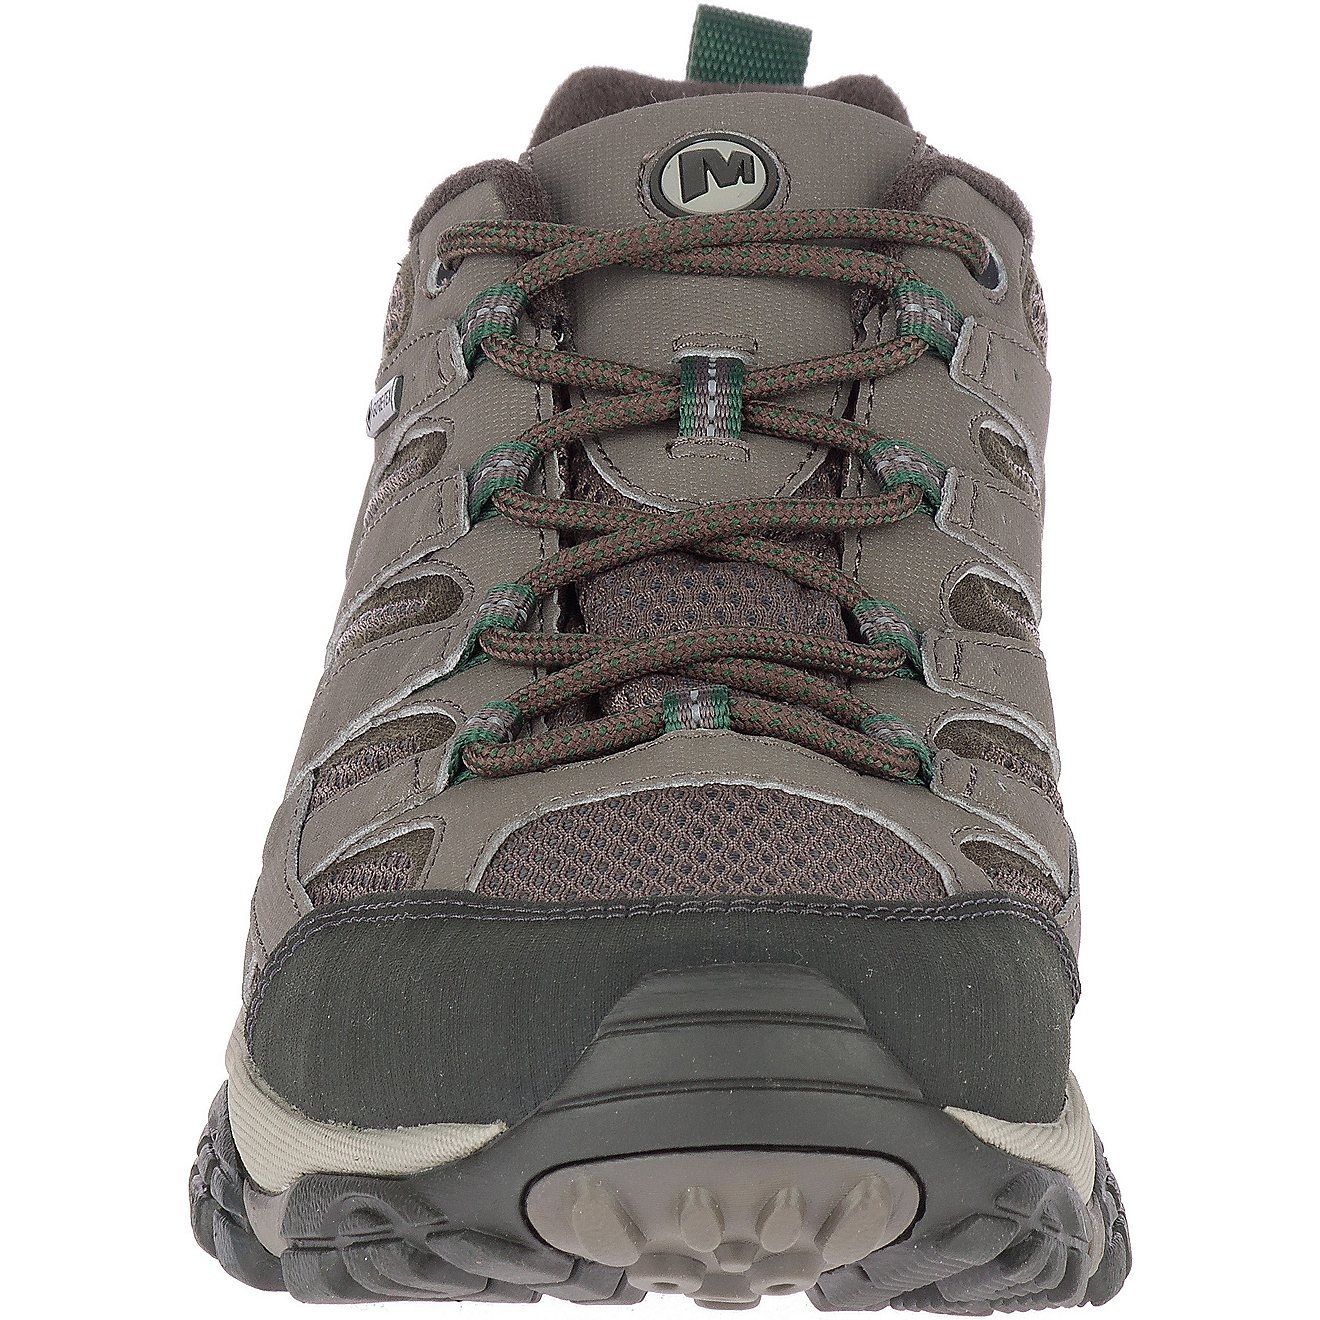 Merrell Men's Moab 2 Gore-Tex Hiking Shoes | Academy